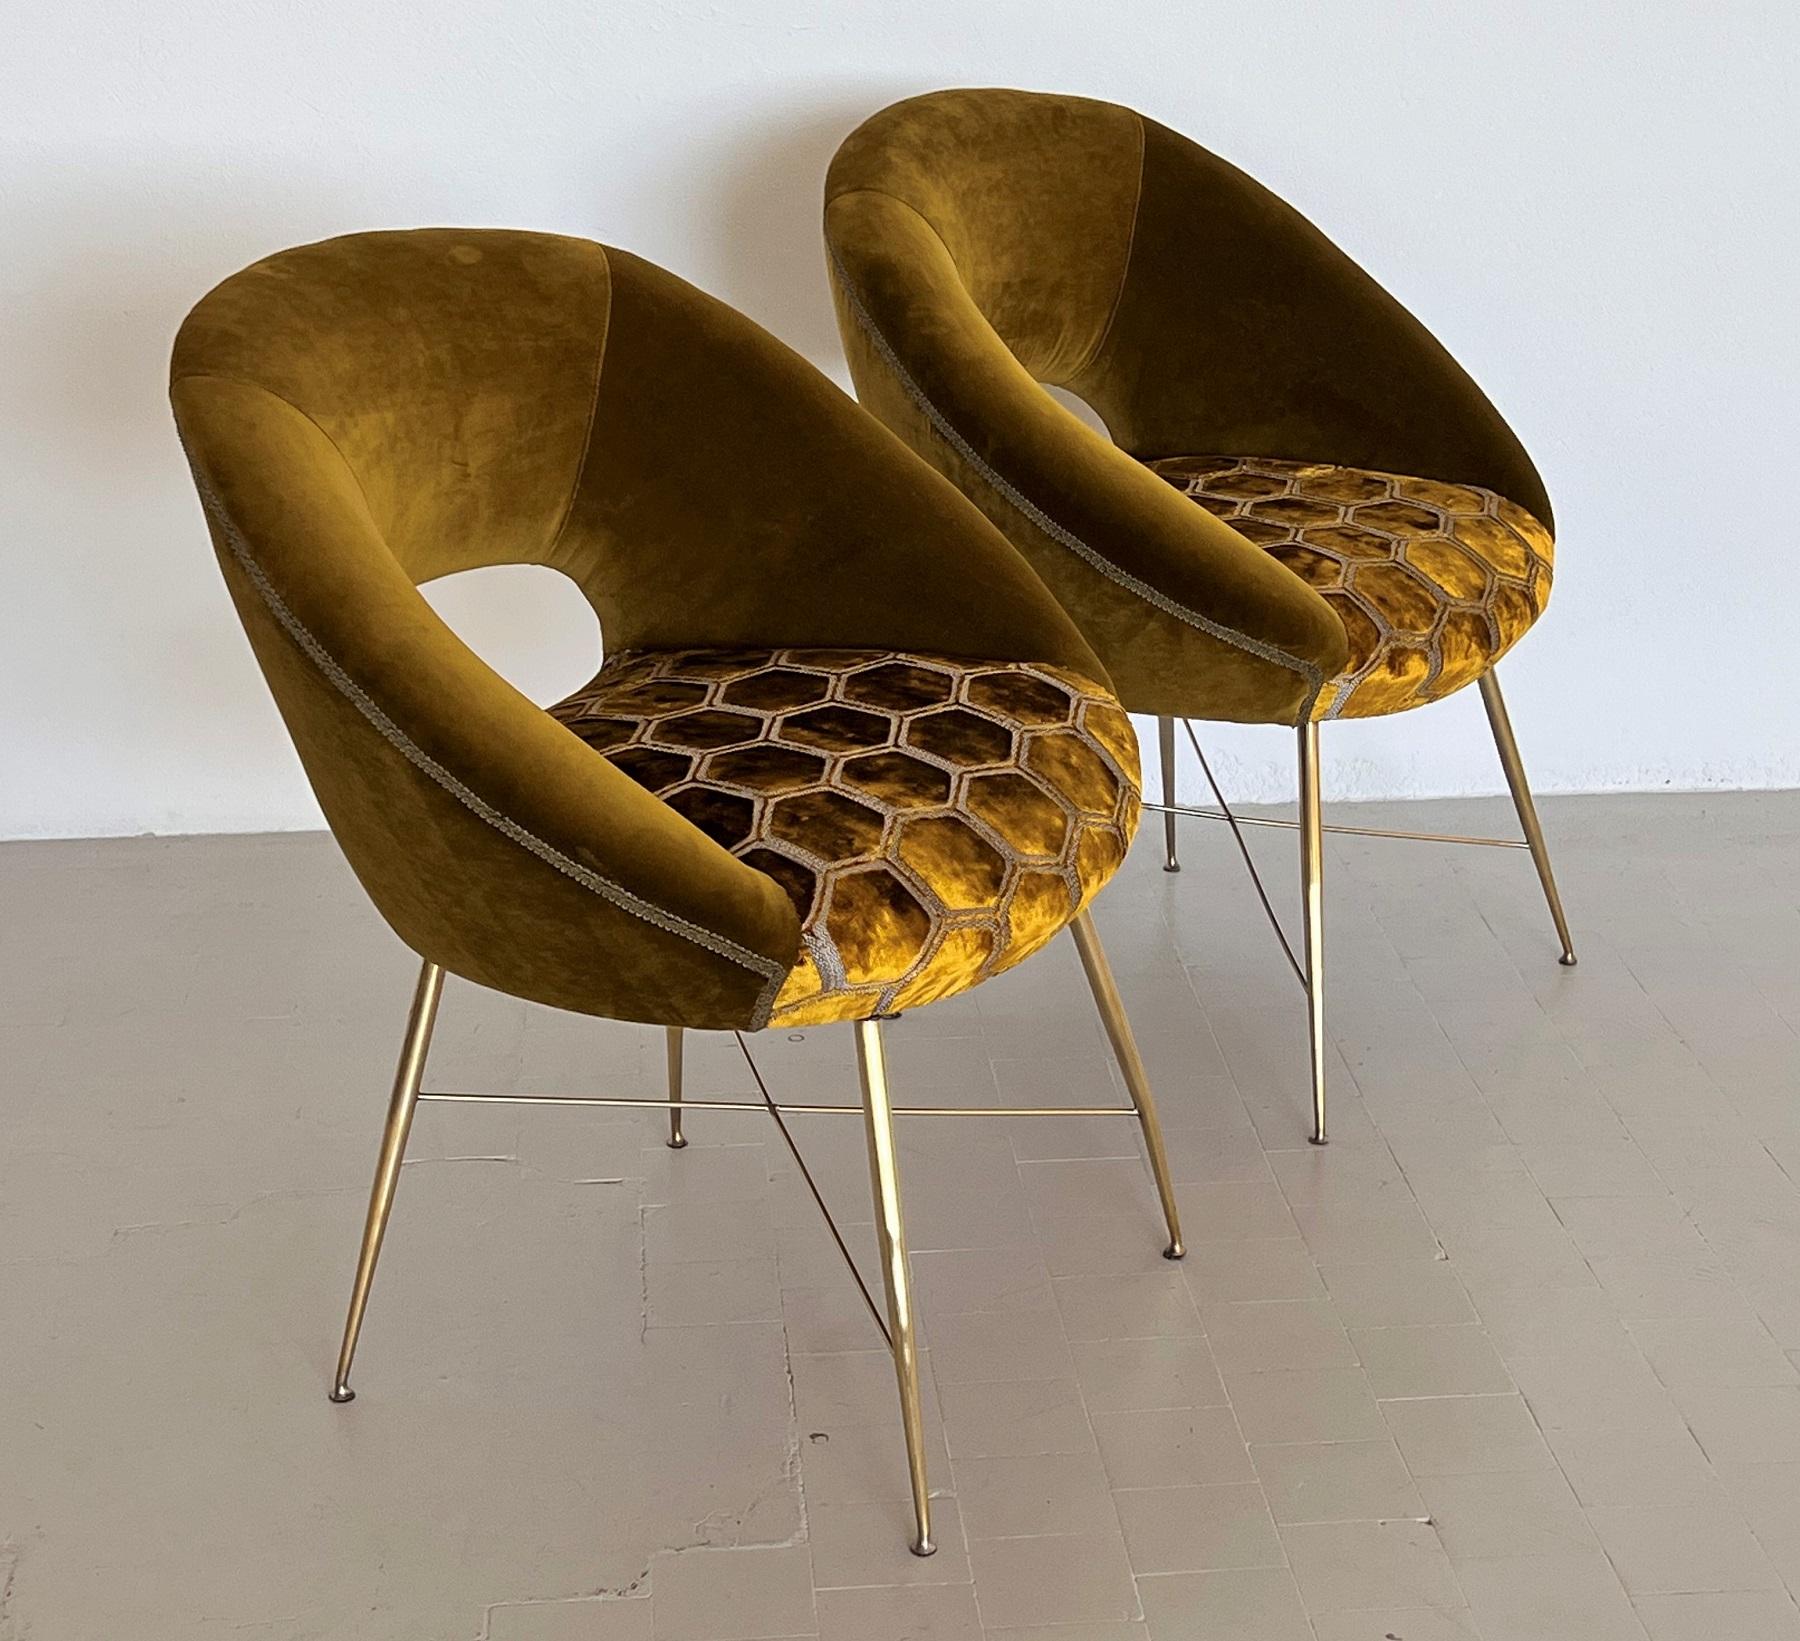 Italian Silvio Cavatorta Pair of Chairs with Brass Legs Re-upholstered in Velvet, 1950s For Sale